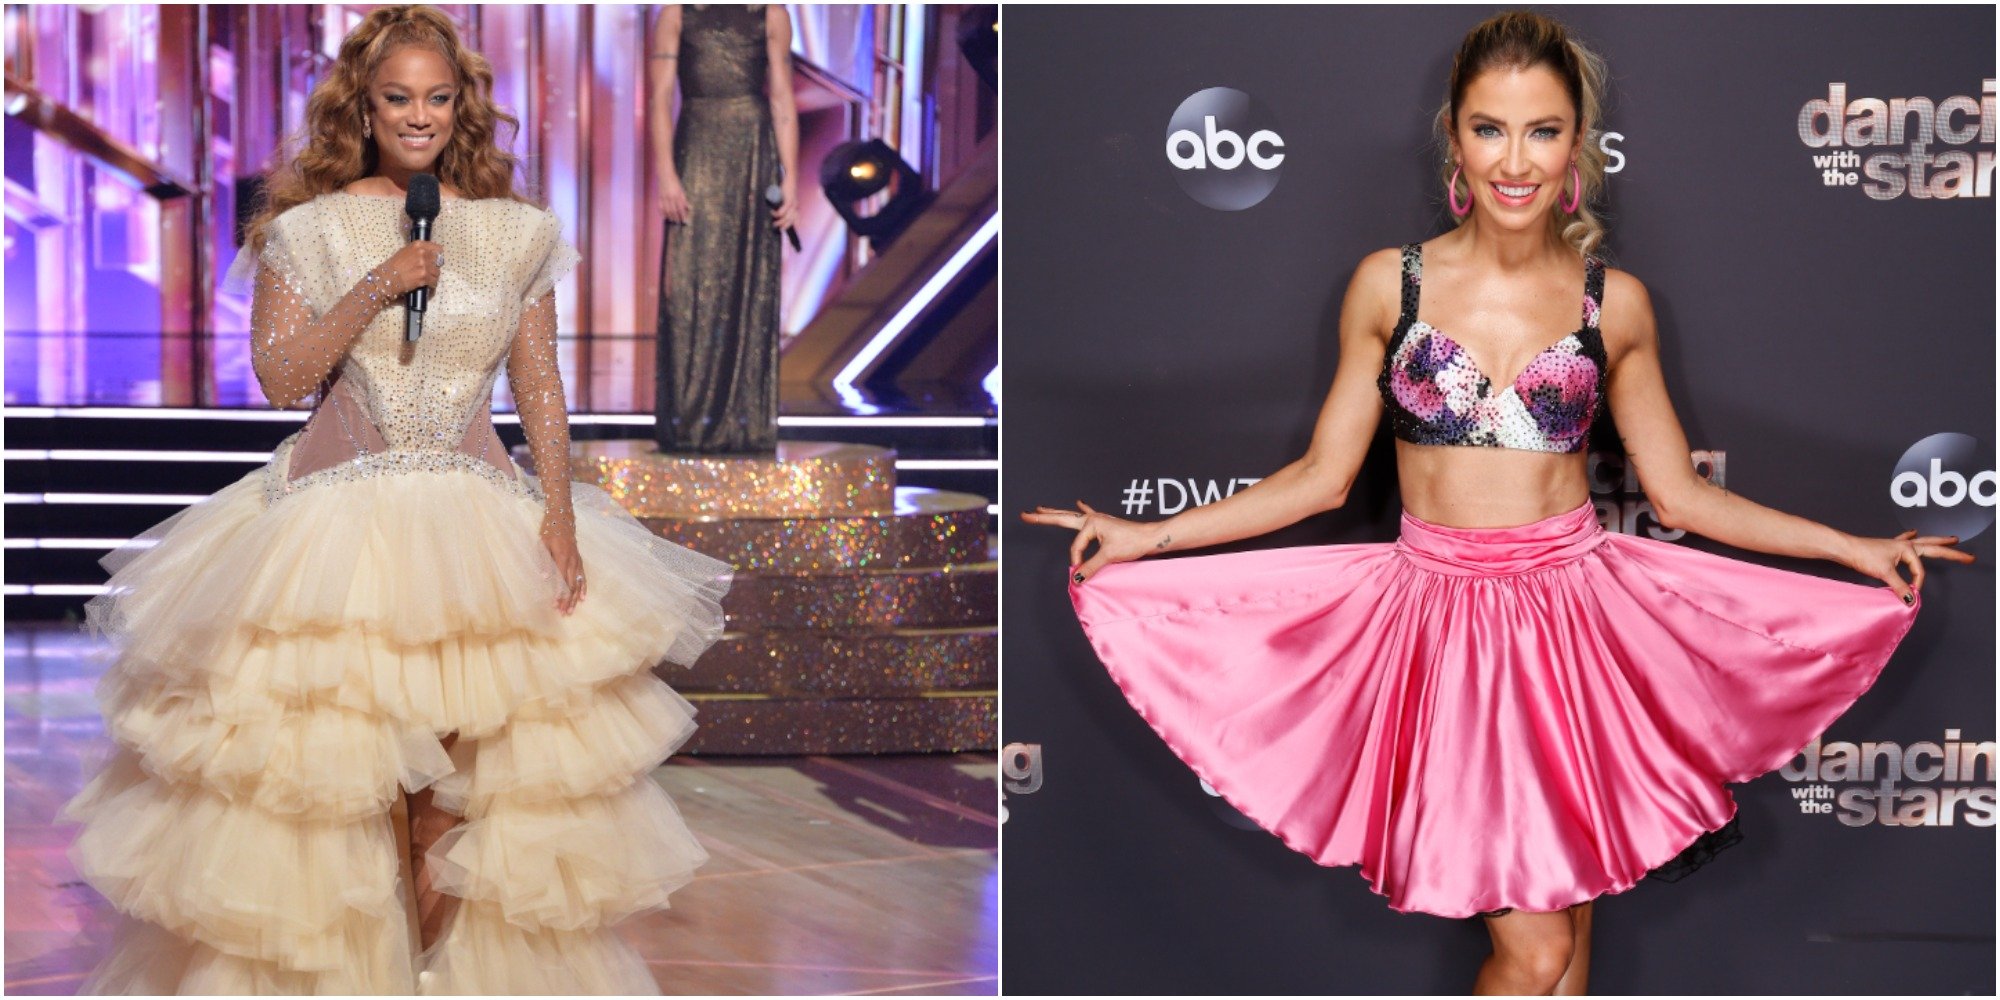 Tyra Banks and Kaitlyn Bristowe in side by side photographs taken on the DWTS set.